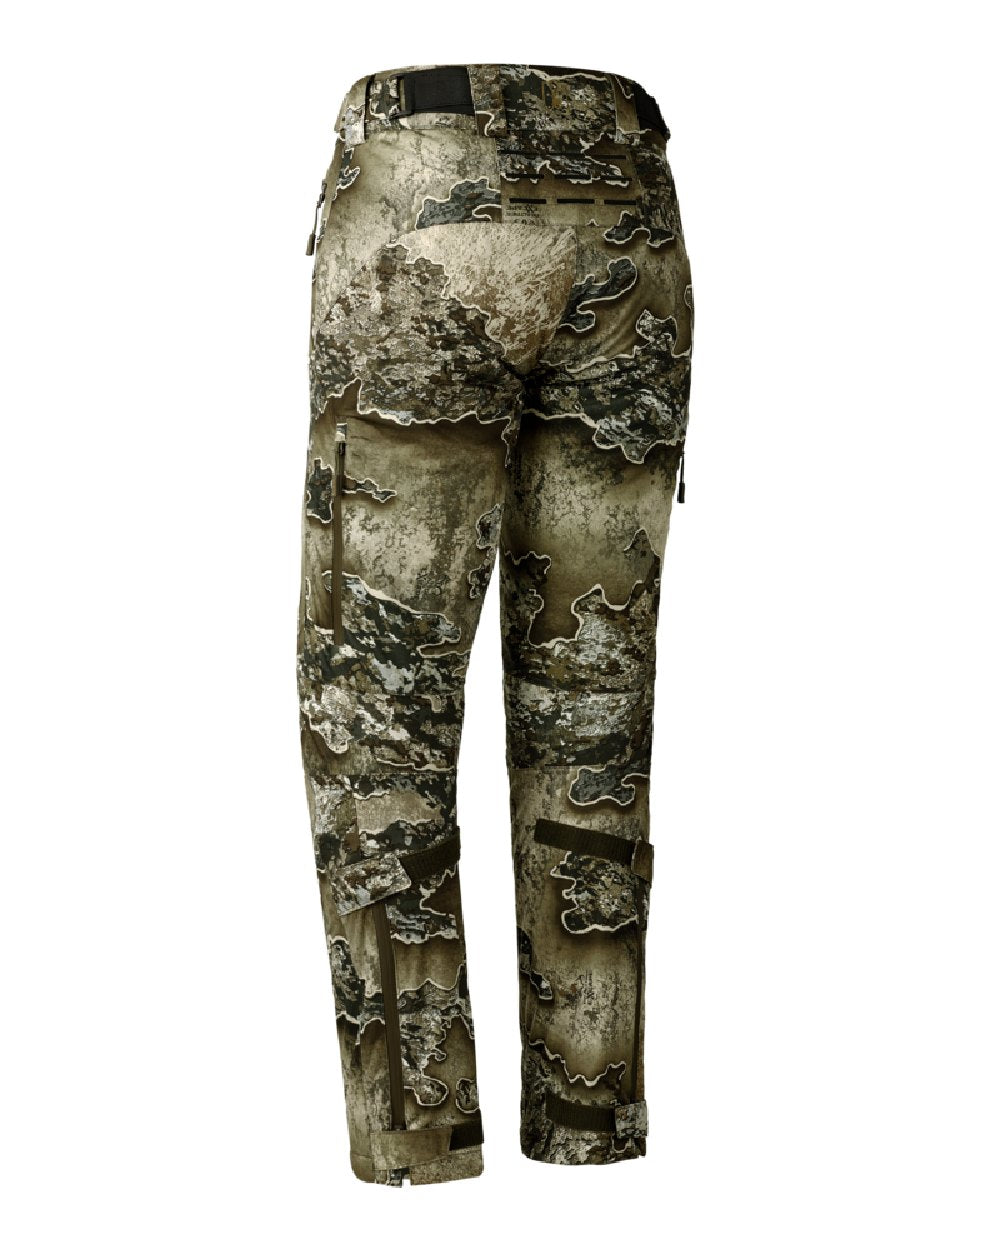 Deerhunter Lady Excape Winter Trousers in REALTREE EXCAPE 